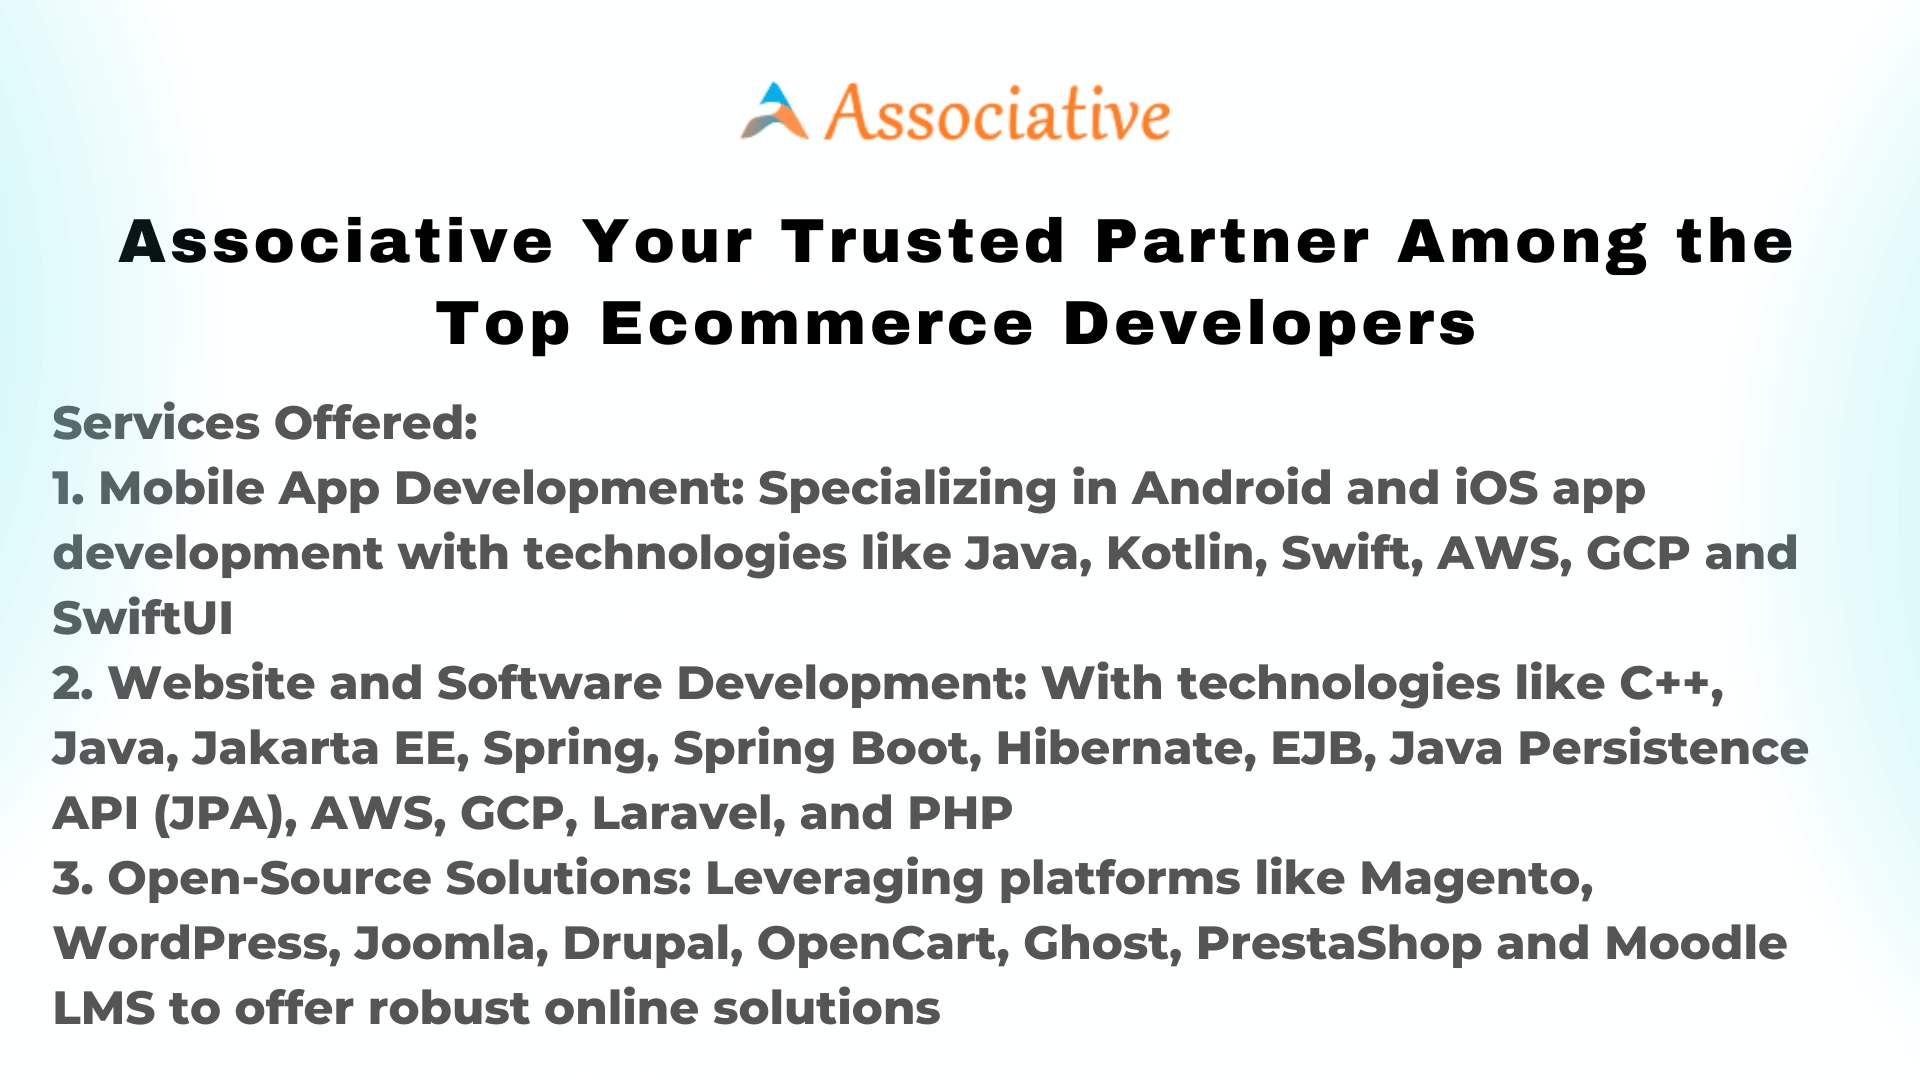 Associative Your Trusted Partner Among the Top Ecommerce Developers